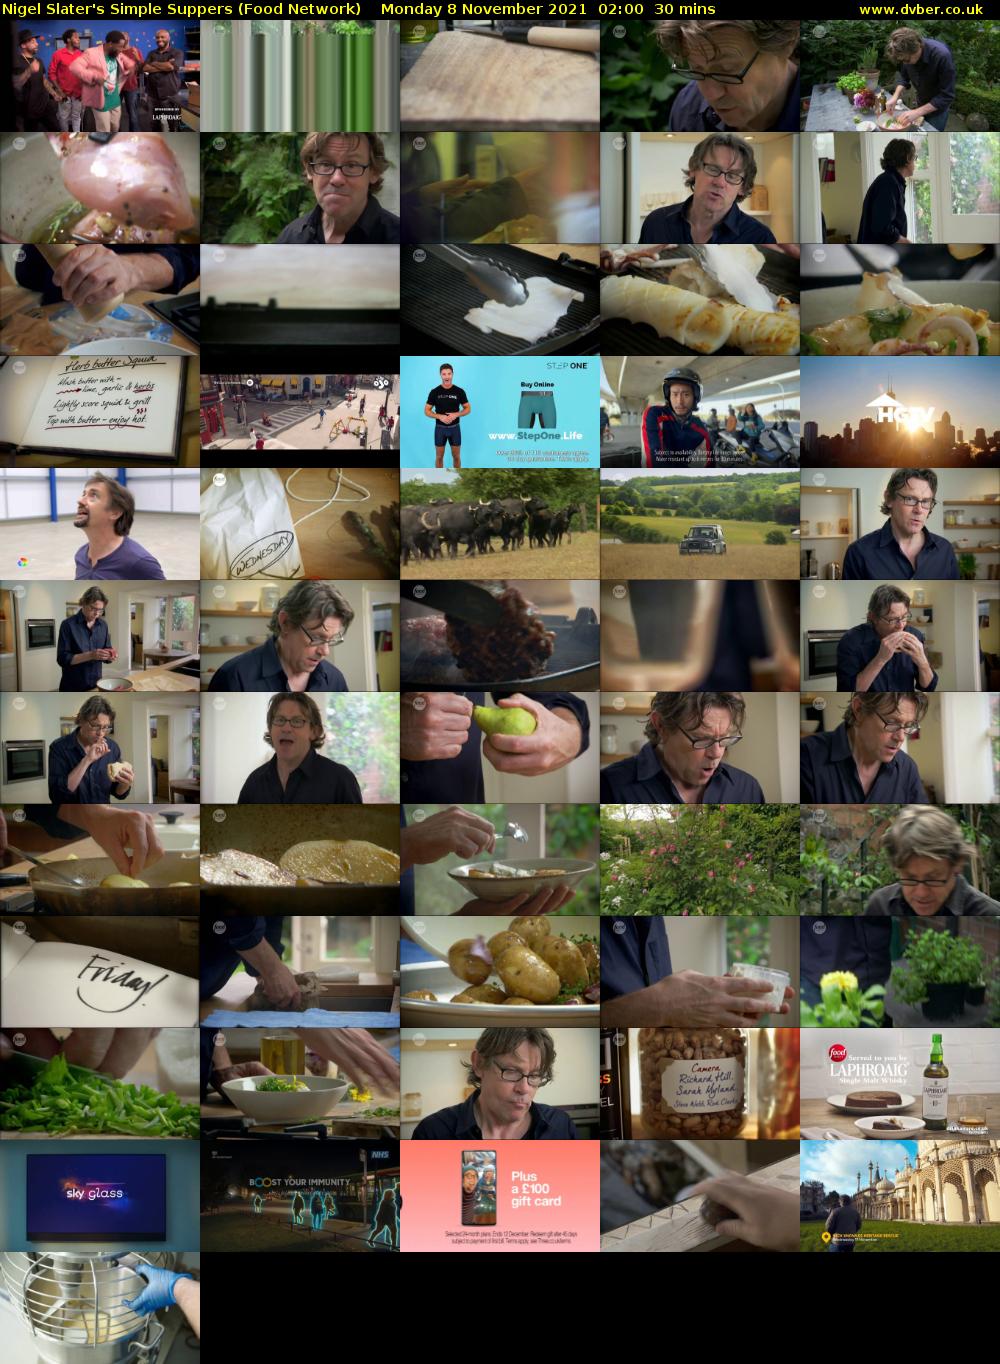 Nigel Slater's Simple Suppers (Food Network) Monday 8 November 2021 02:00 - 02:30